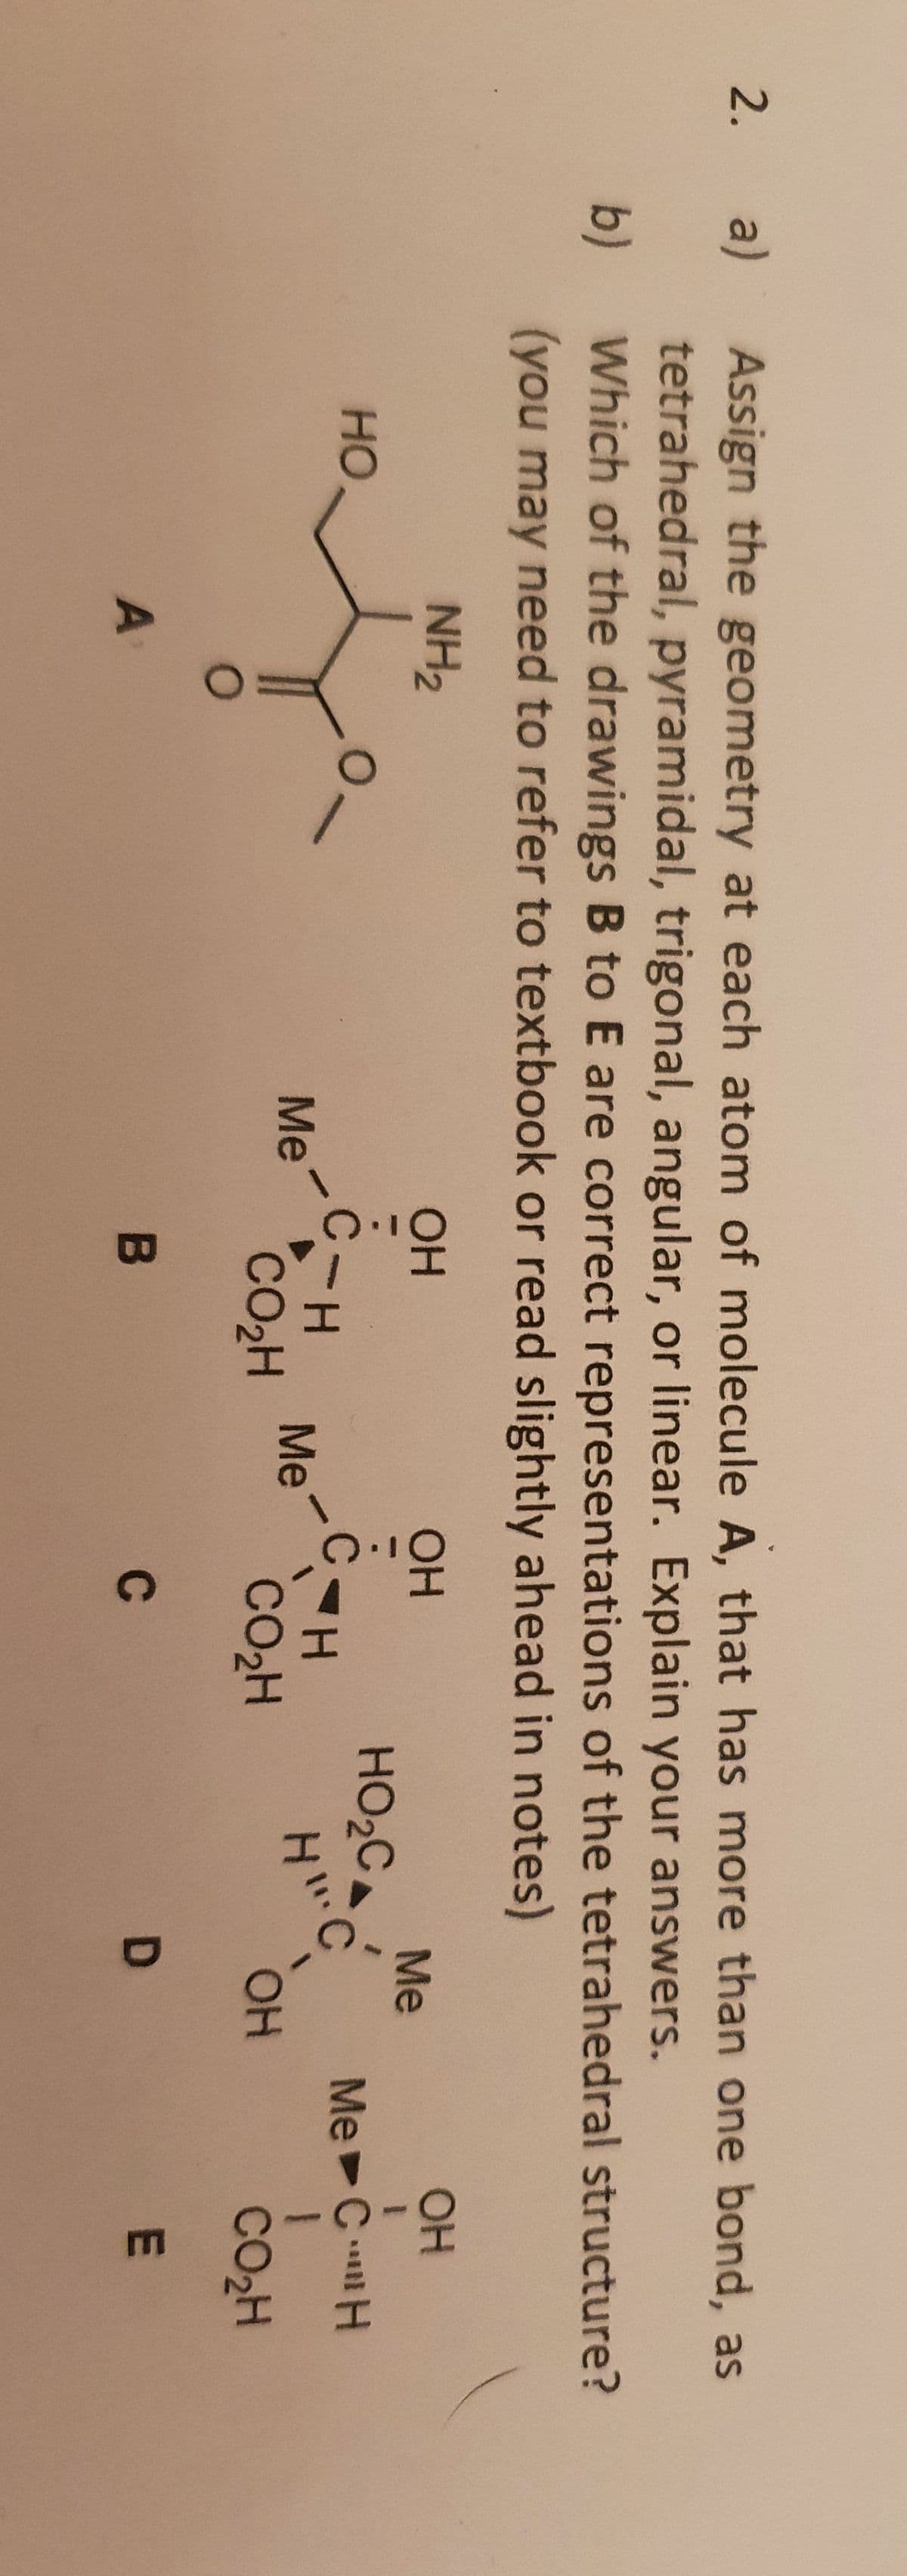 1.
Assign the geometry at each atom of molecule A, that has more than one bond, as
a)
tetrahedral, pyramidal, trigonal, angular, or linear. Explain your answers.
Which of the drawings B to E are correct representations of the tetrahedral structure?
2.
b)
(you may need to refer to textbook or read slightly ahead in notes)
OH
NH2
OH
OH
Me
HO2C
H.
но
Me C
C-H
Me
CO2H
Me
CO2H
OH
CO2H
